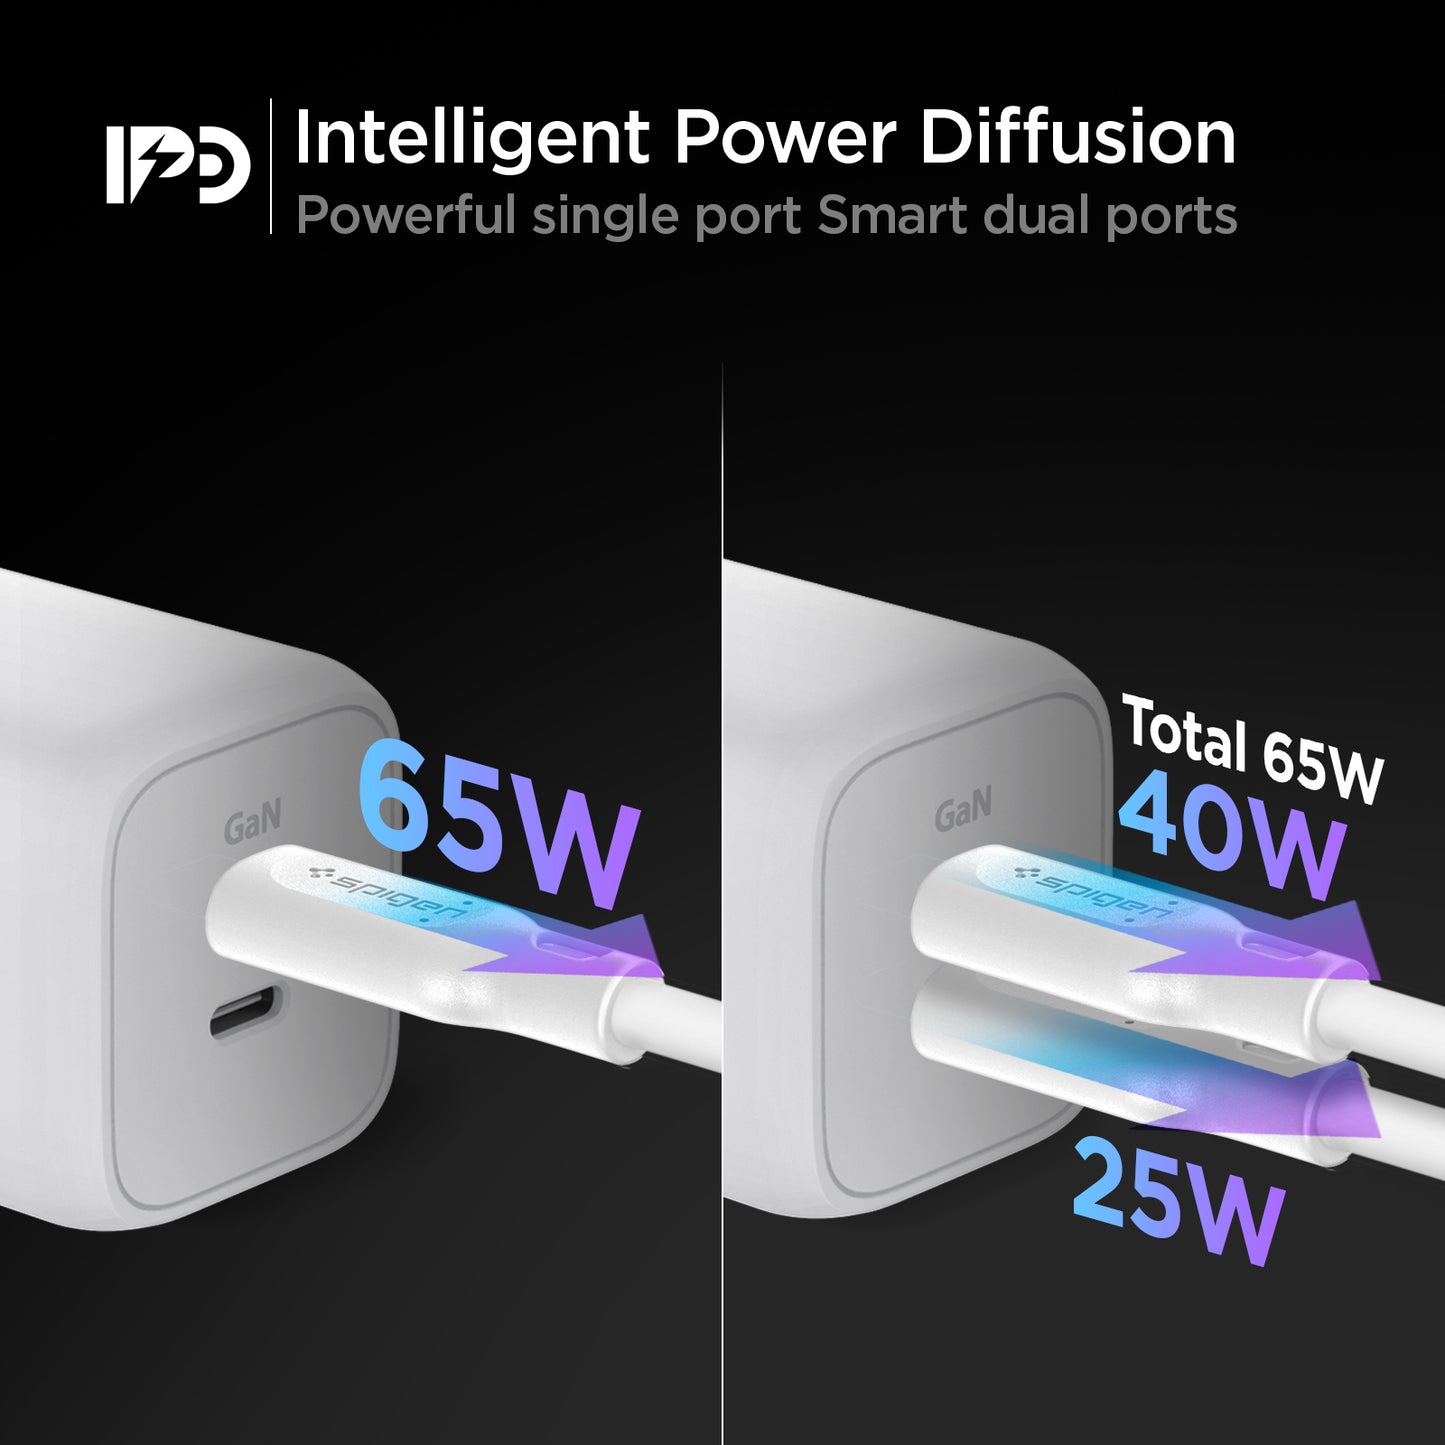 ACH03719 - ArcStation™ Pro GaN 652 Dual Port Wall Charger PE2106 in White showing the Intelligent Power Diffusion, powerful single and smart dual ports. 2 charger single port with 65W and dual port with a total of 40W